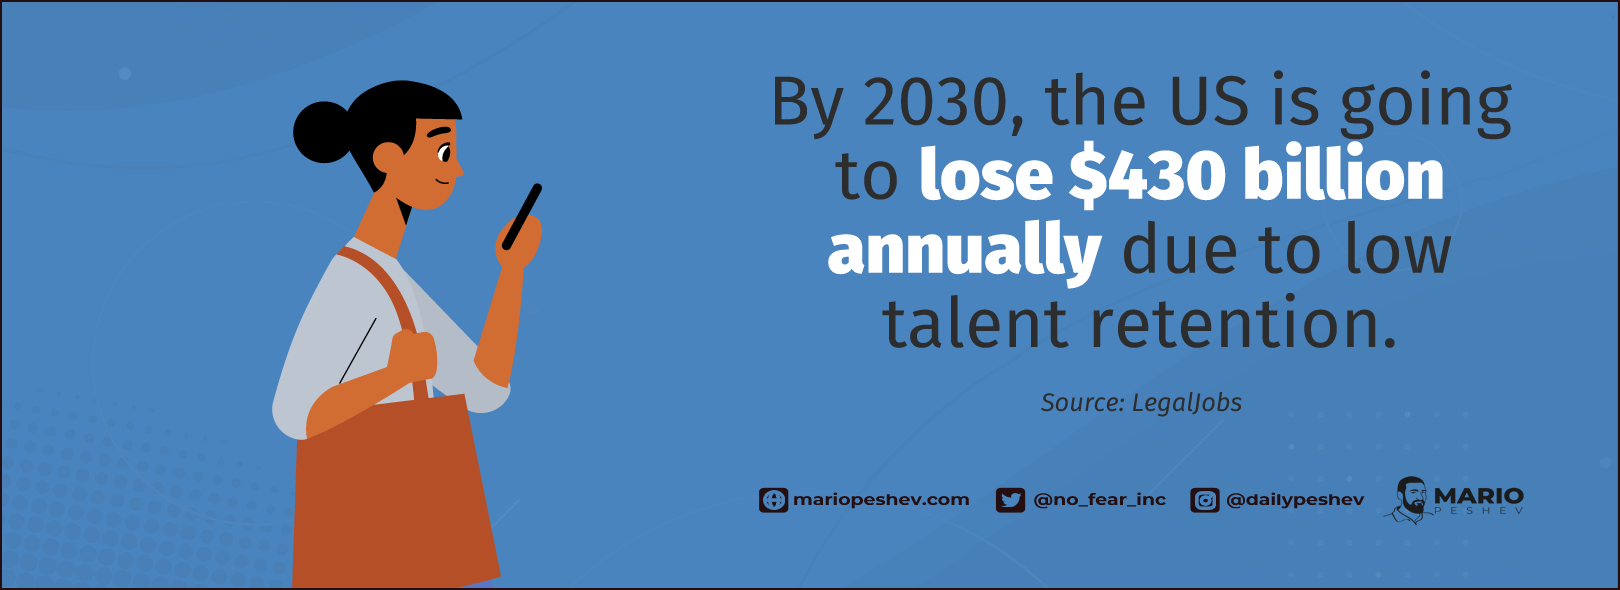 On how to retain top talent: By 2030, the US is going to lose $430 billion annually due to low talent retention.